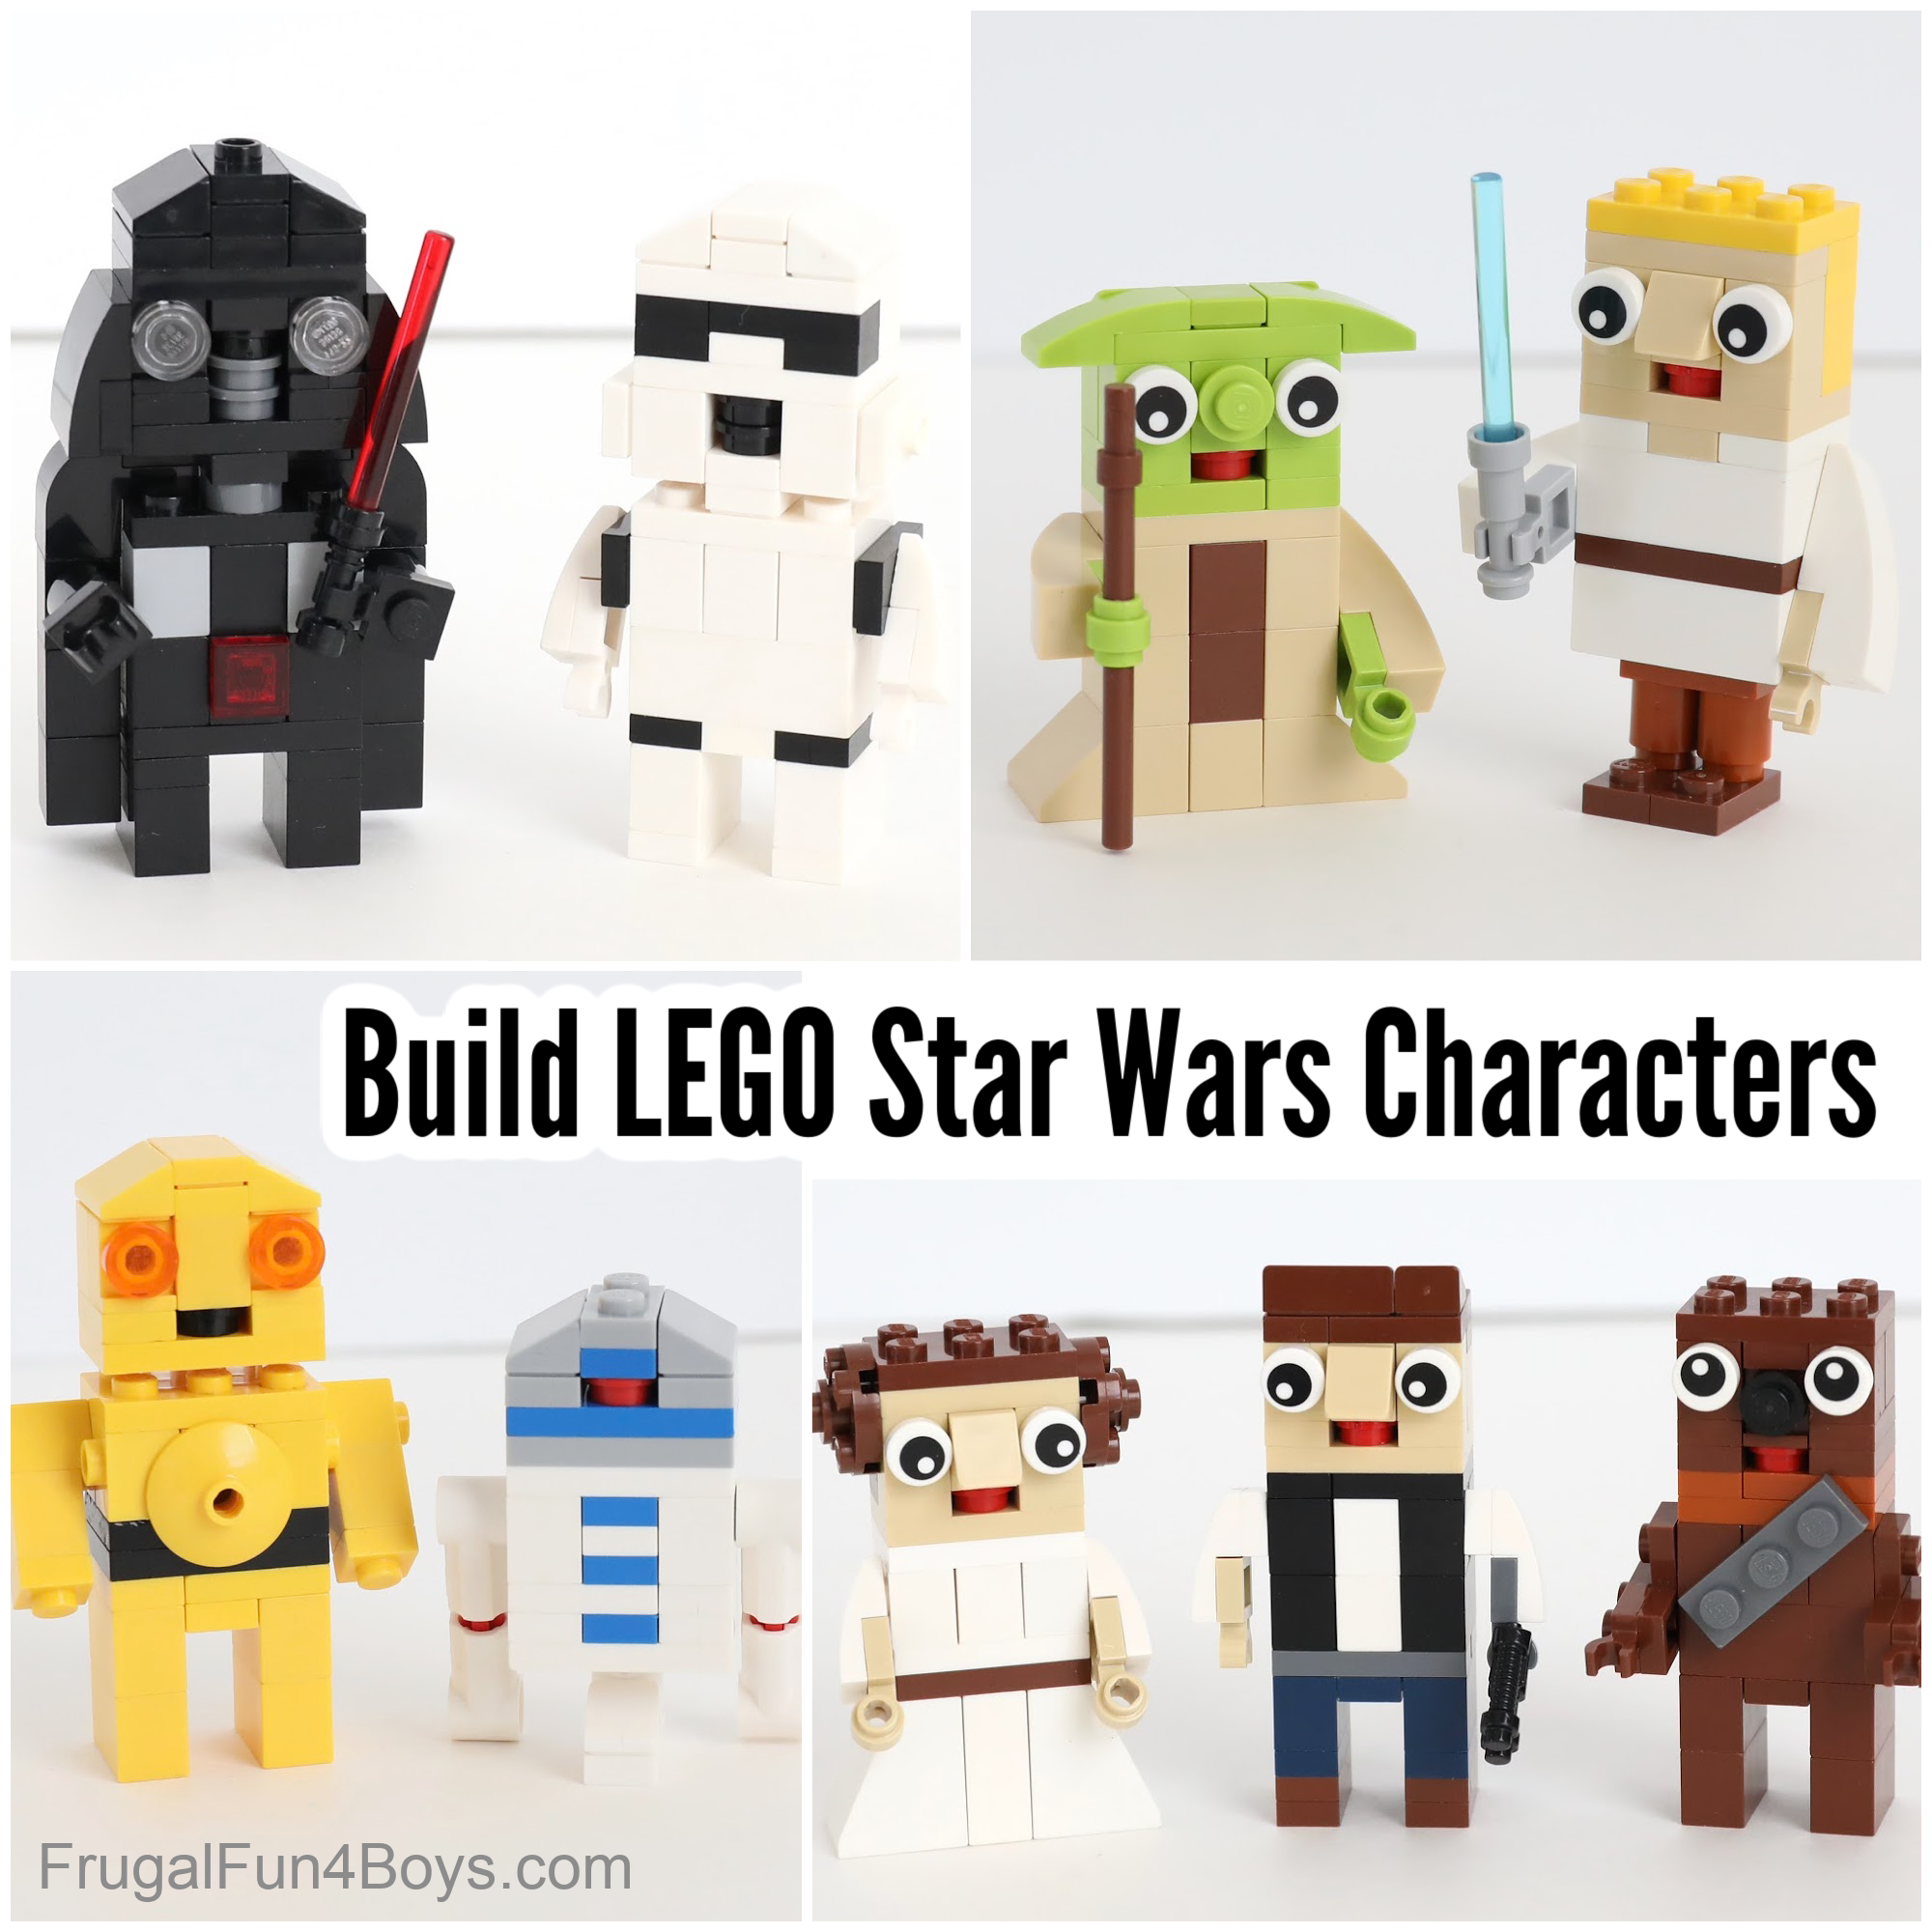 Star Wars Mini Characters - Frugal Fun For Boys and Girls